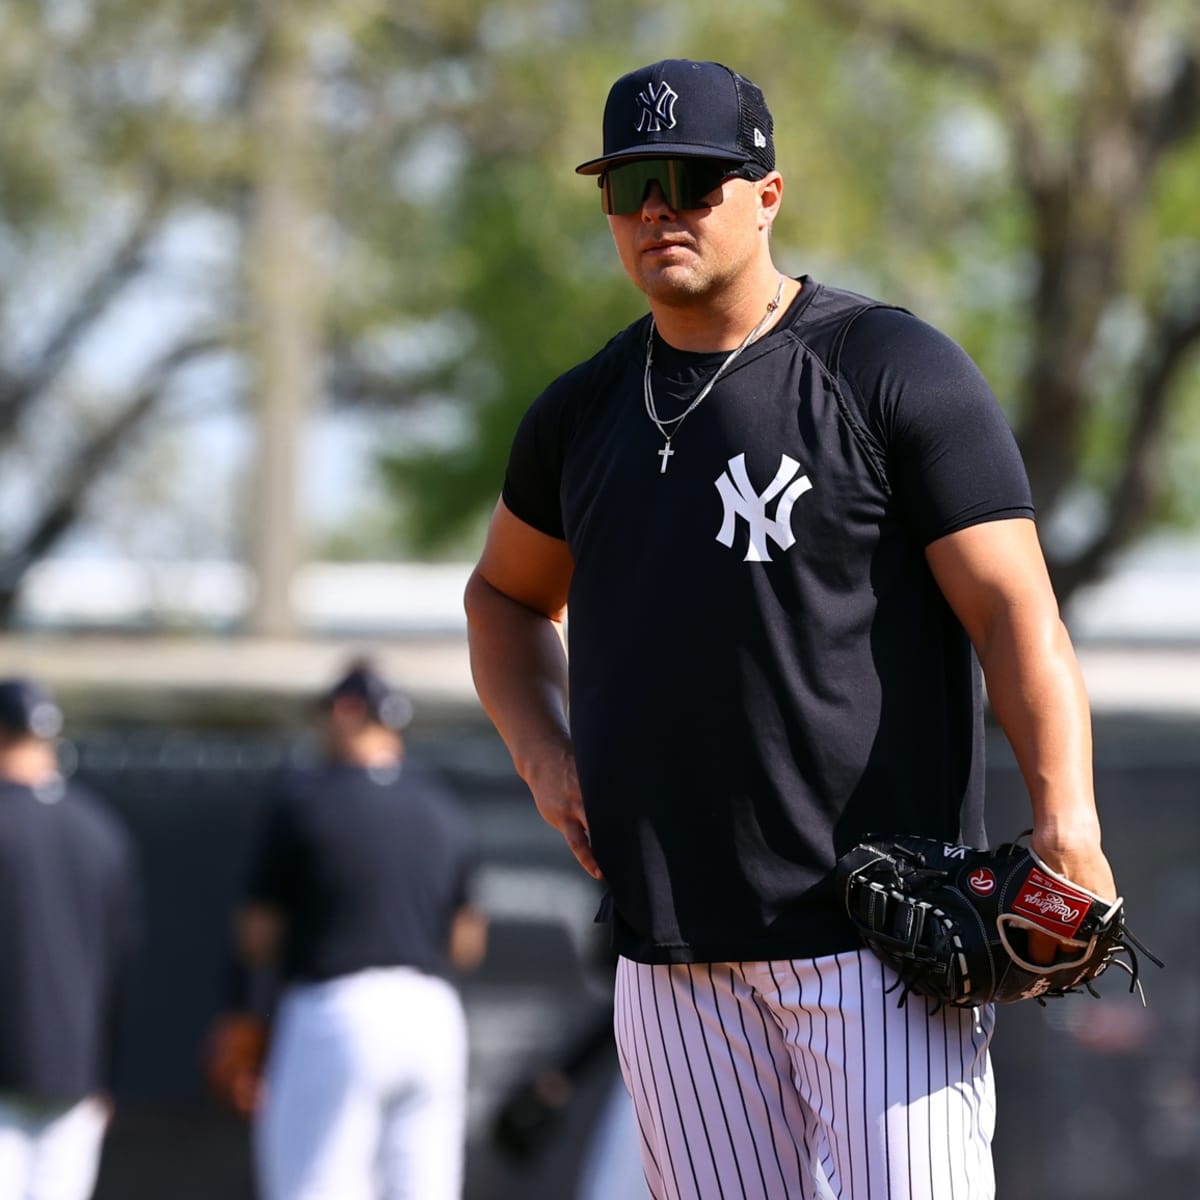 Luke Voit is in the best shape of his life - NBC Sports